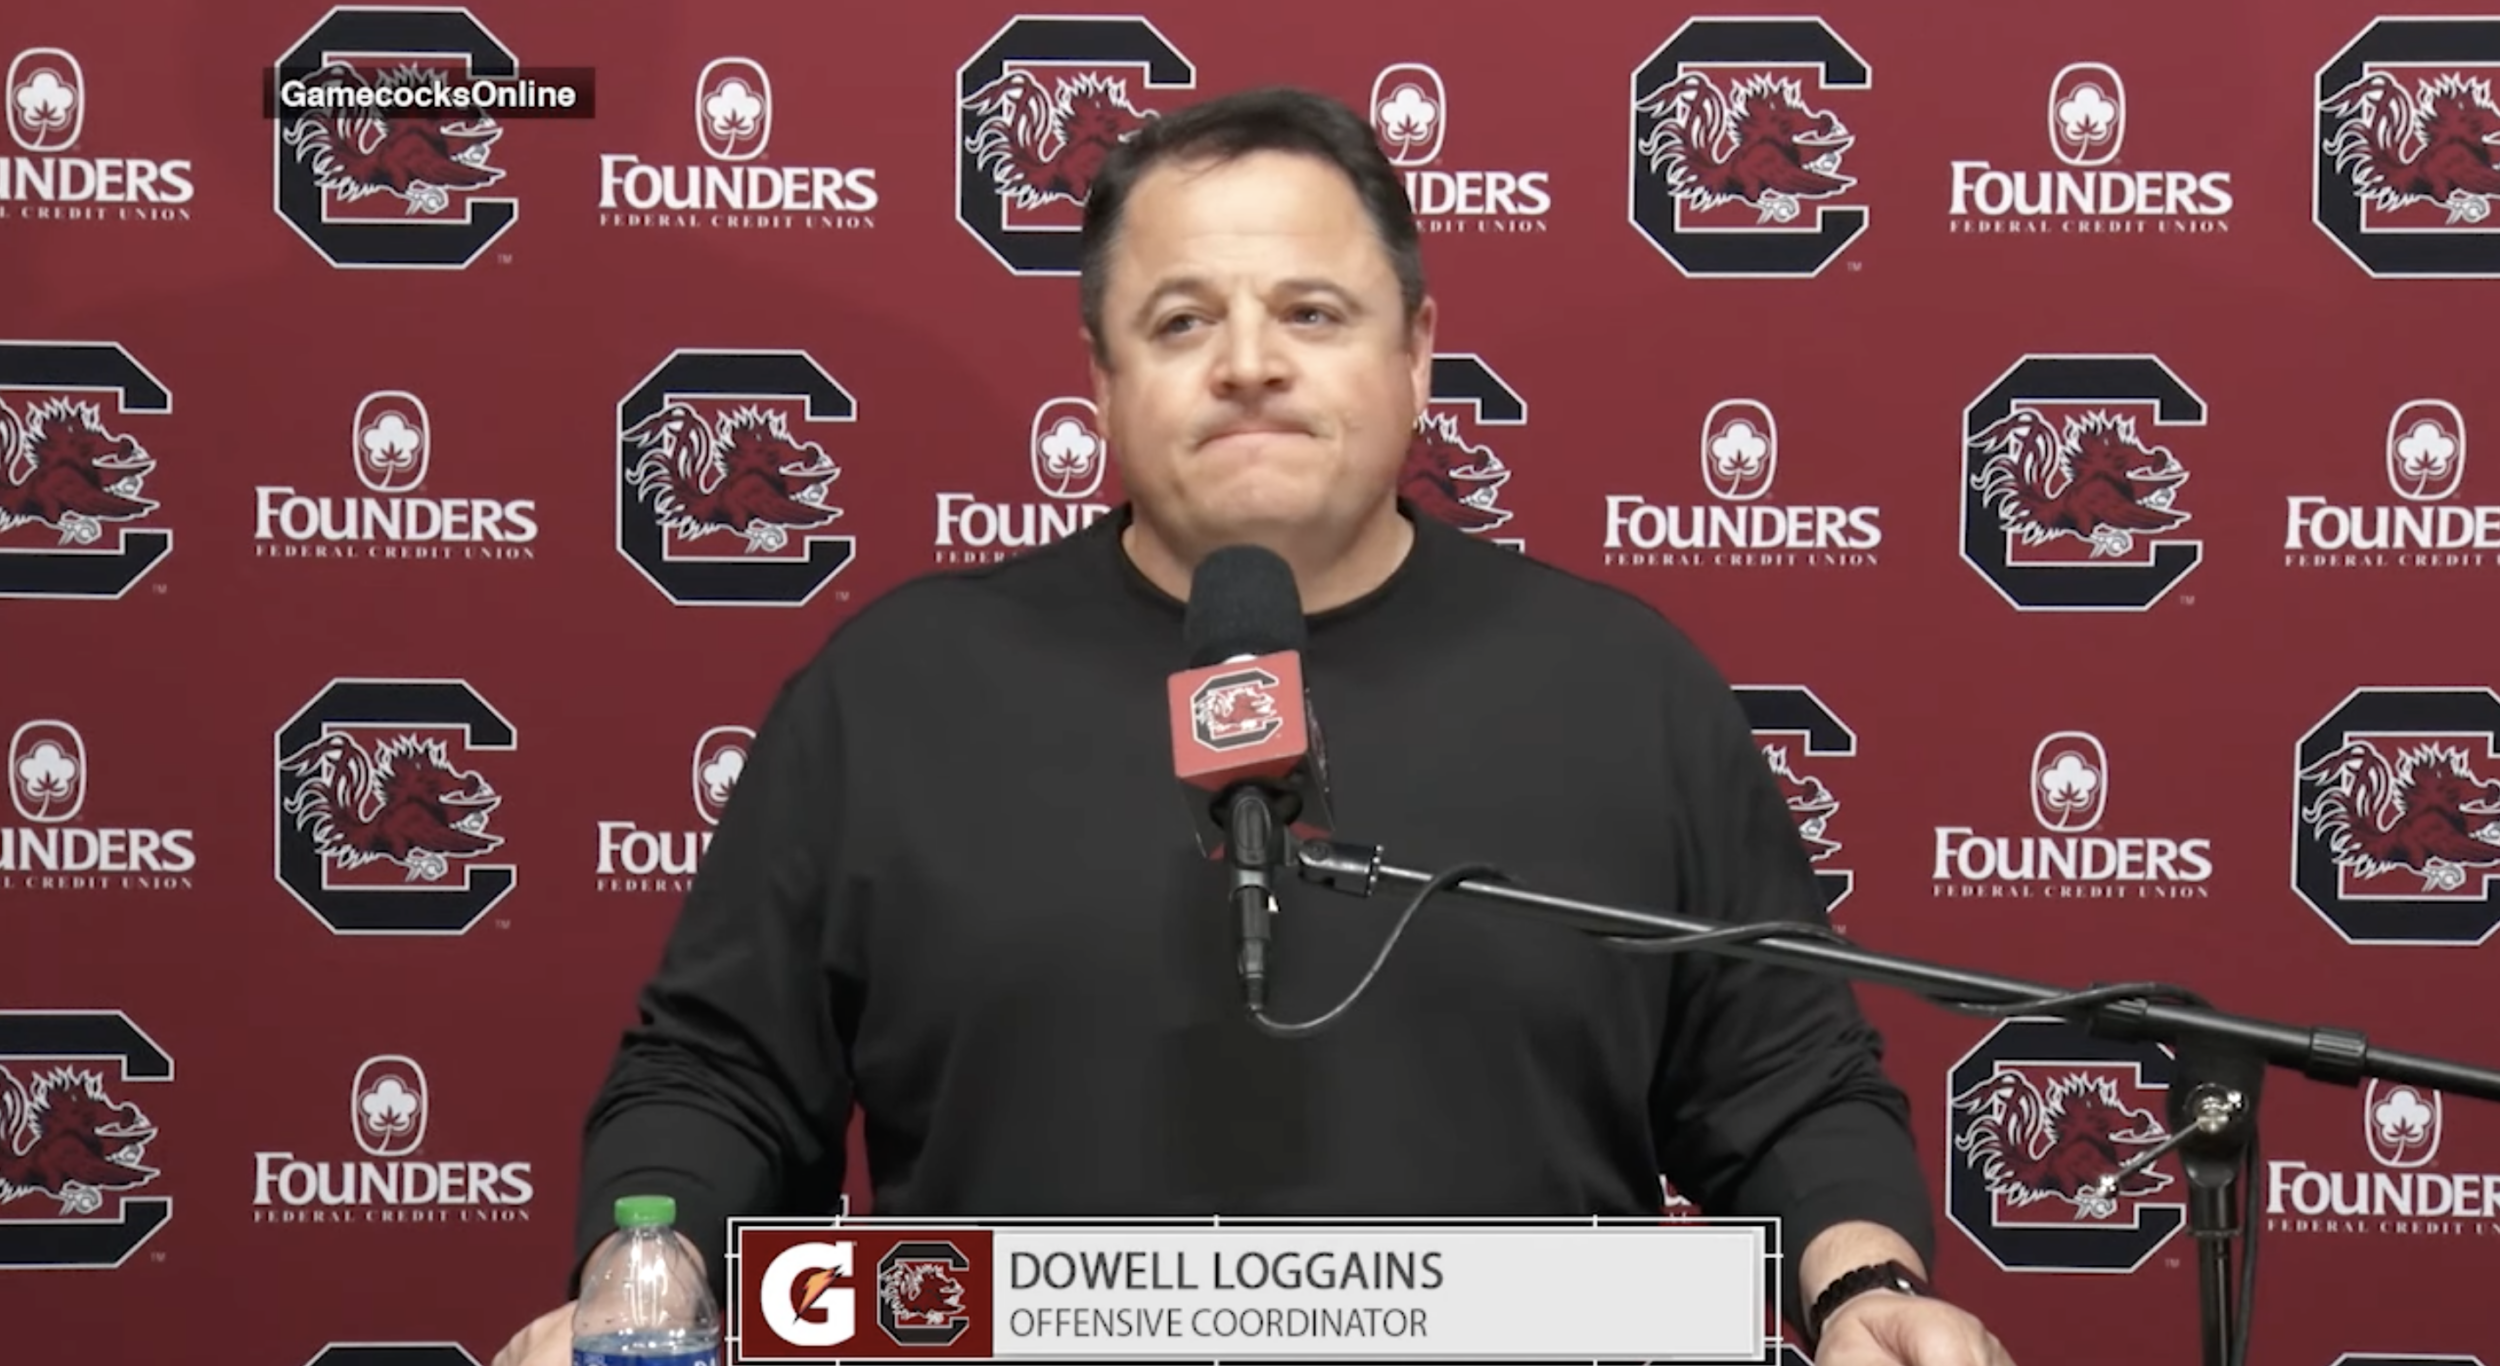 Video: Dowell Loggains News Conference